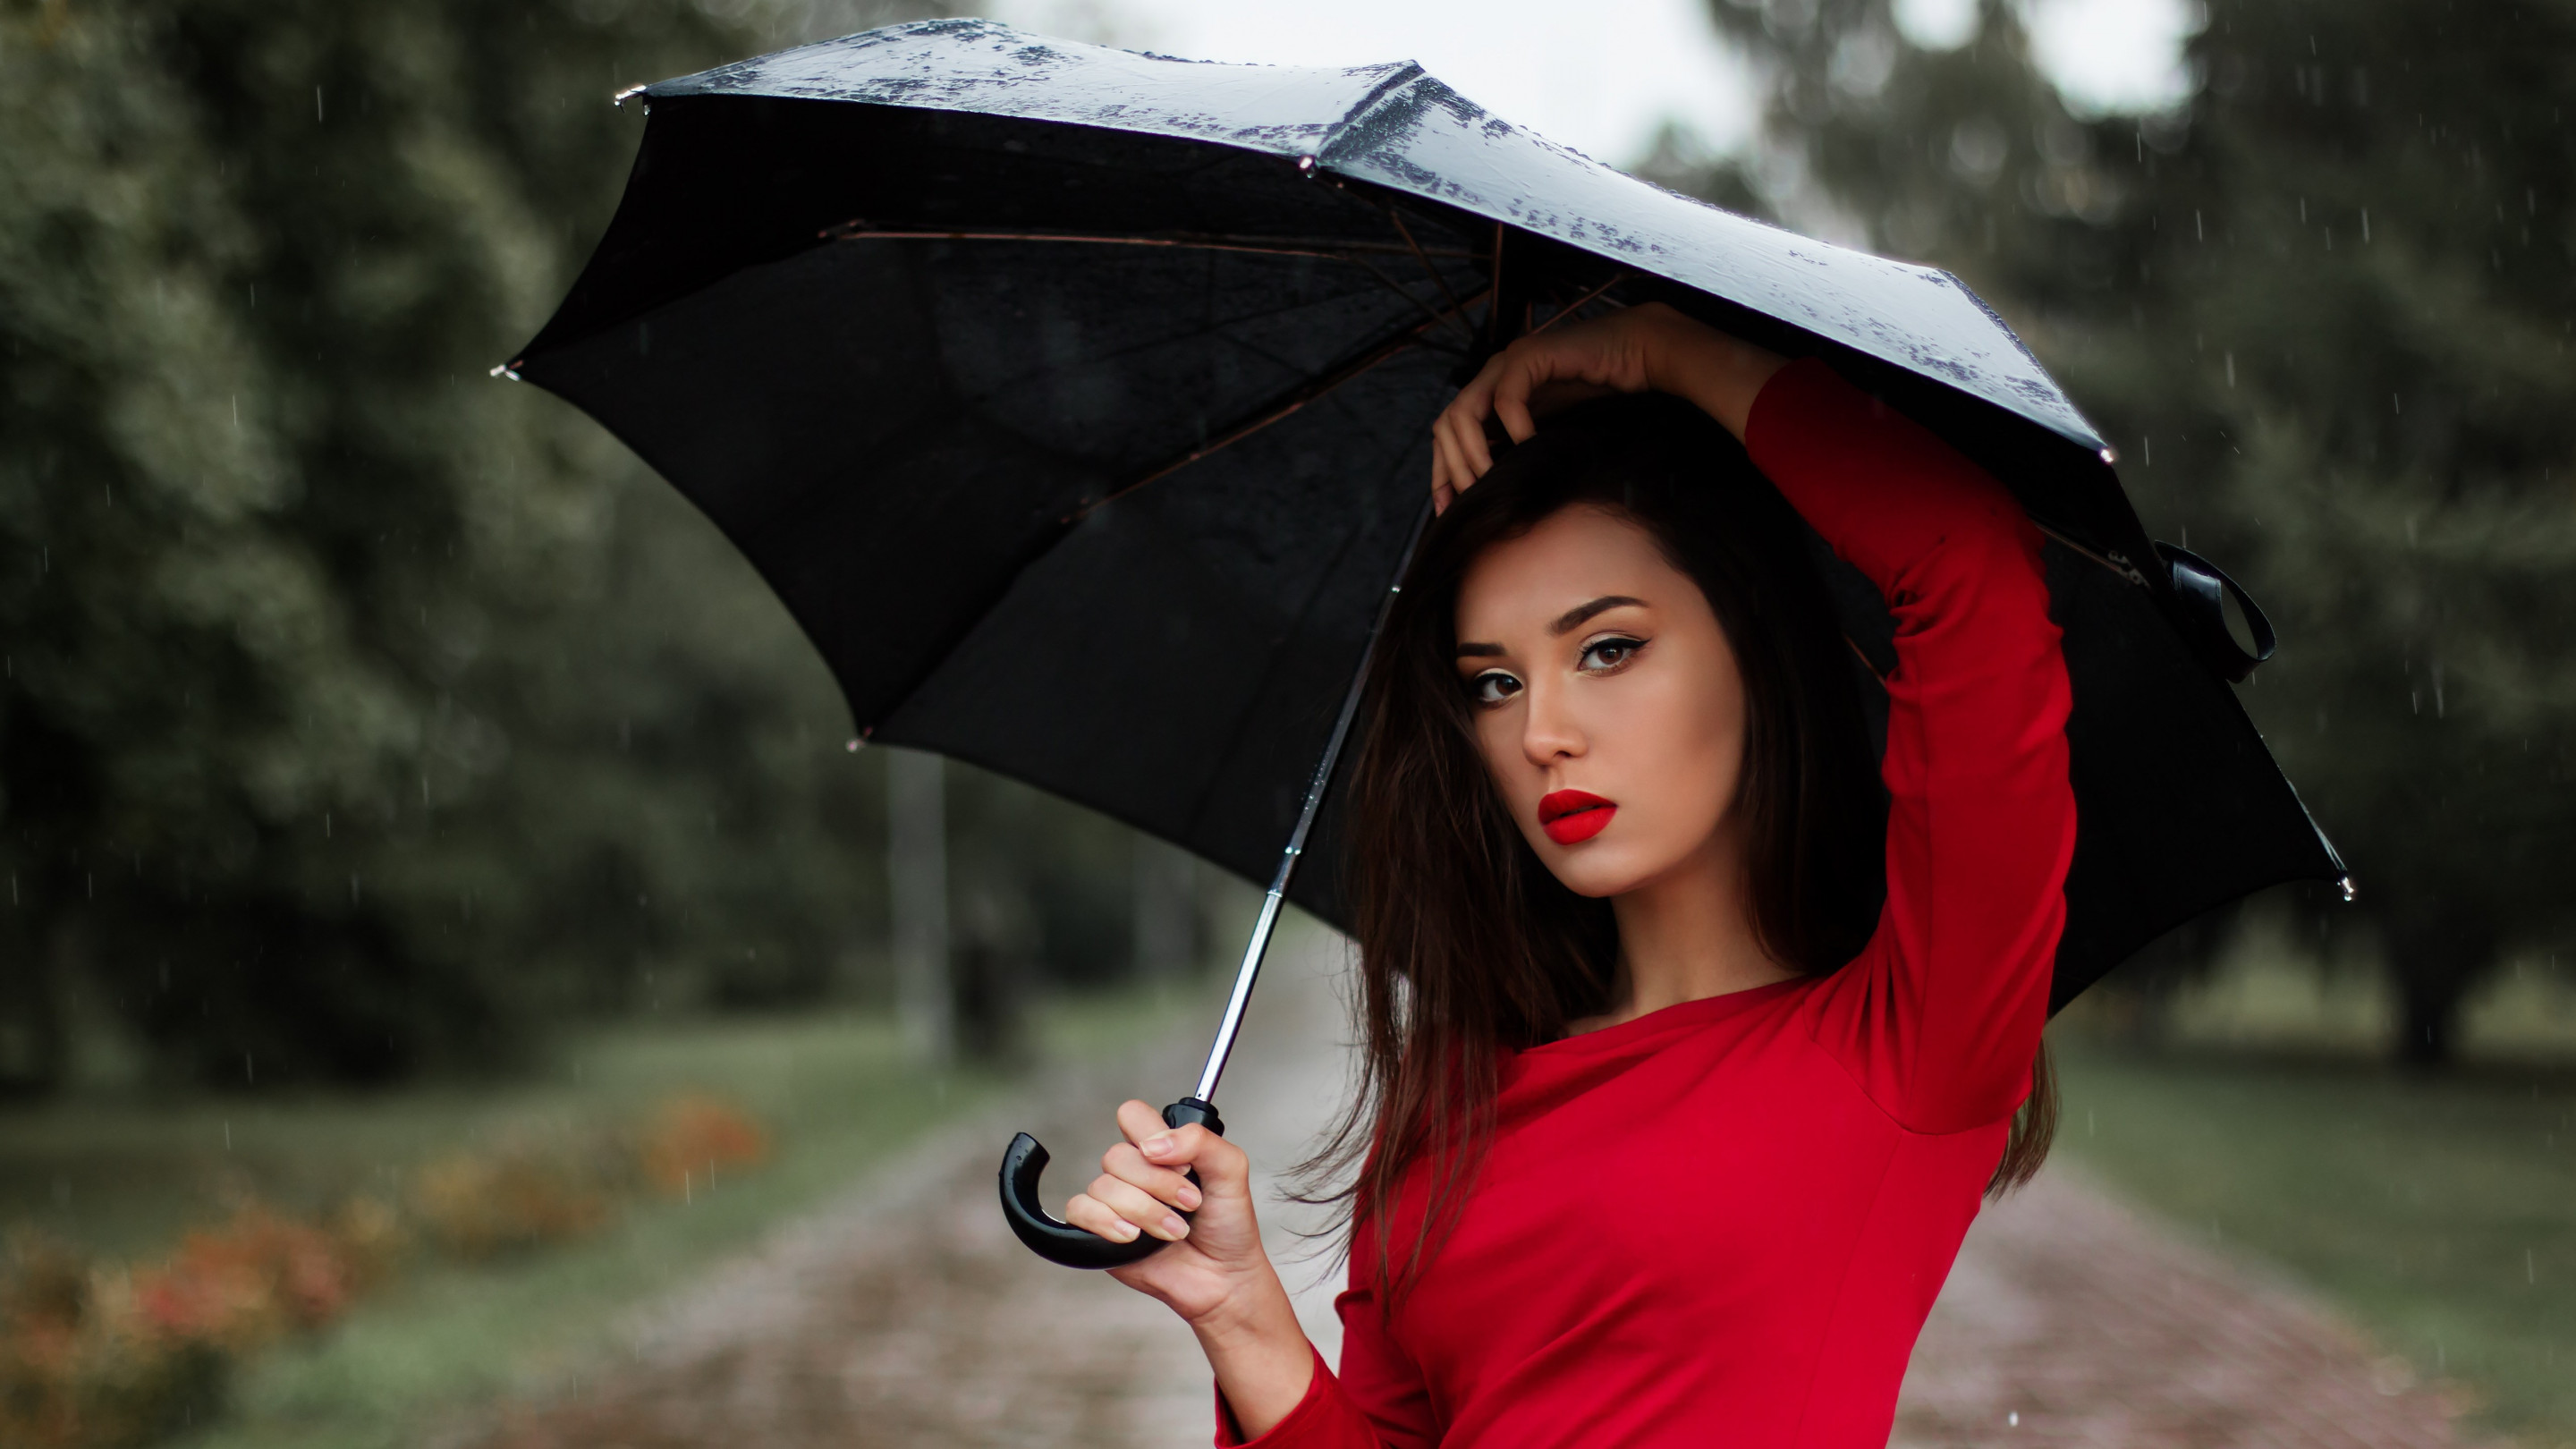 Beauitful girl in a rainy day wallpaper 2880x1620